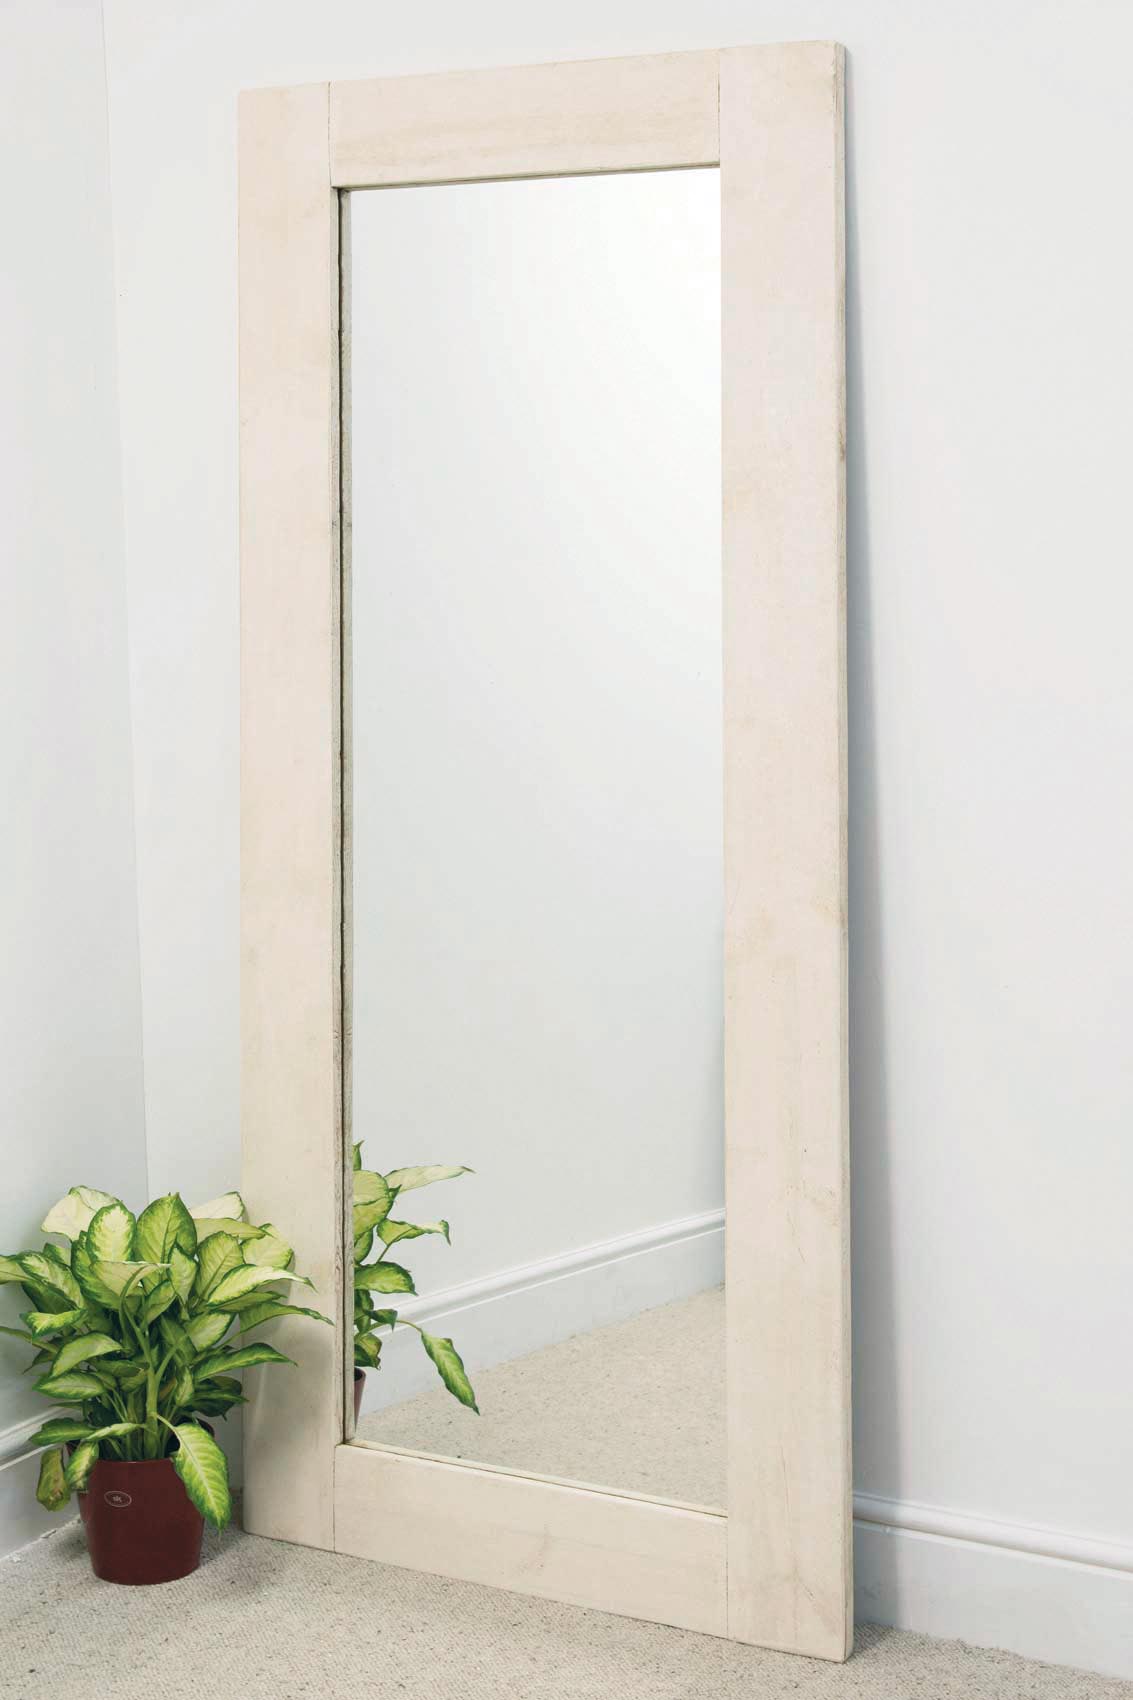 White Solid Wood Full Length Dress Mirror 6Ft10 X 2Ft10 Rectangle Contemporary 5060301515349 eBay